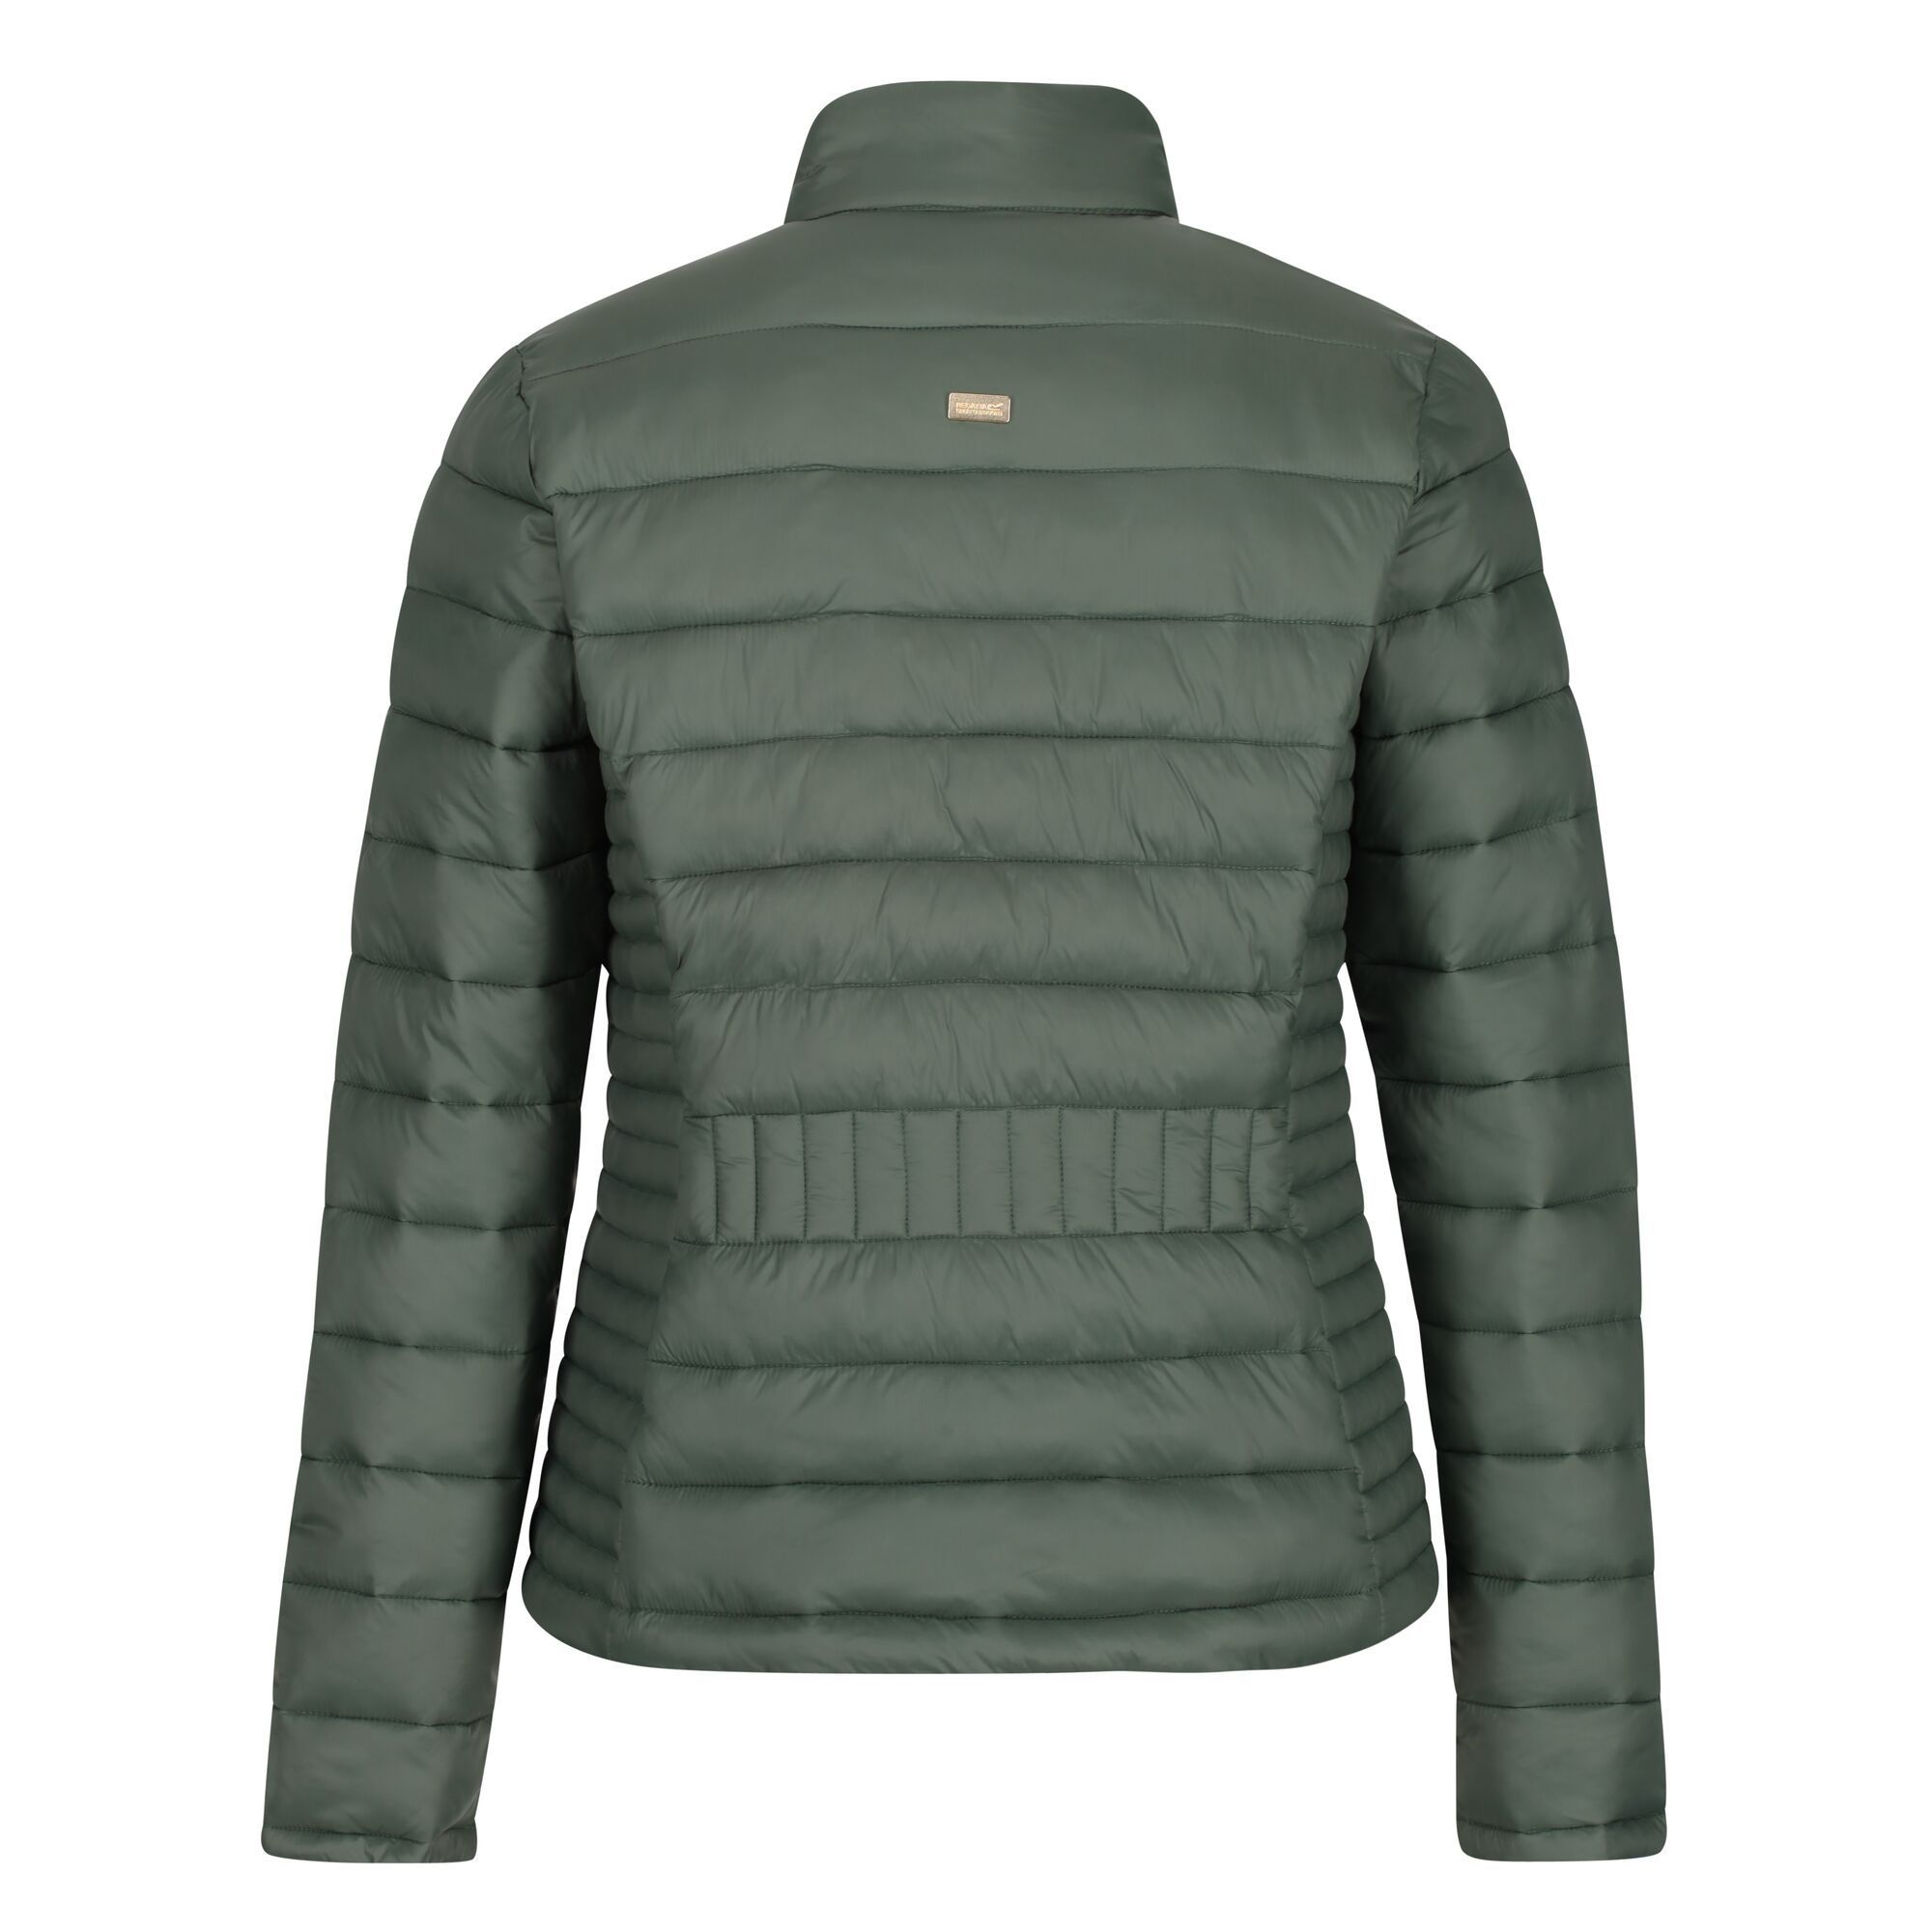 Material: 100% polyamide. Synthetic warmloft down-touch water repellent insulation. Polyester taffeta lined. 2 zipped lower pockets.